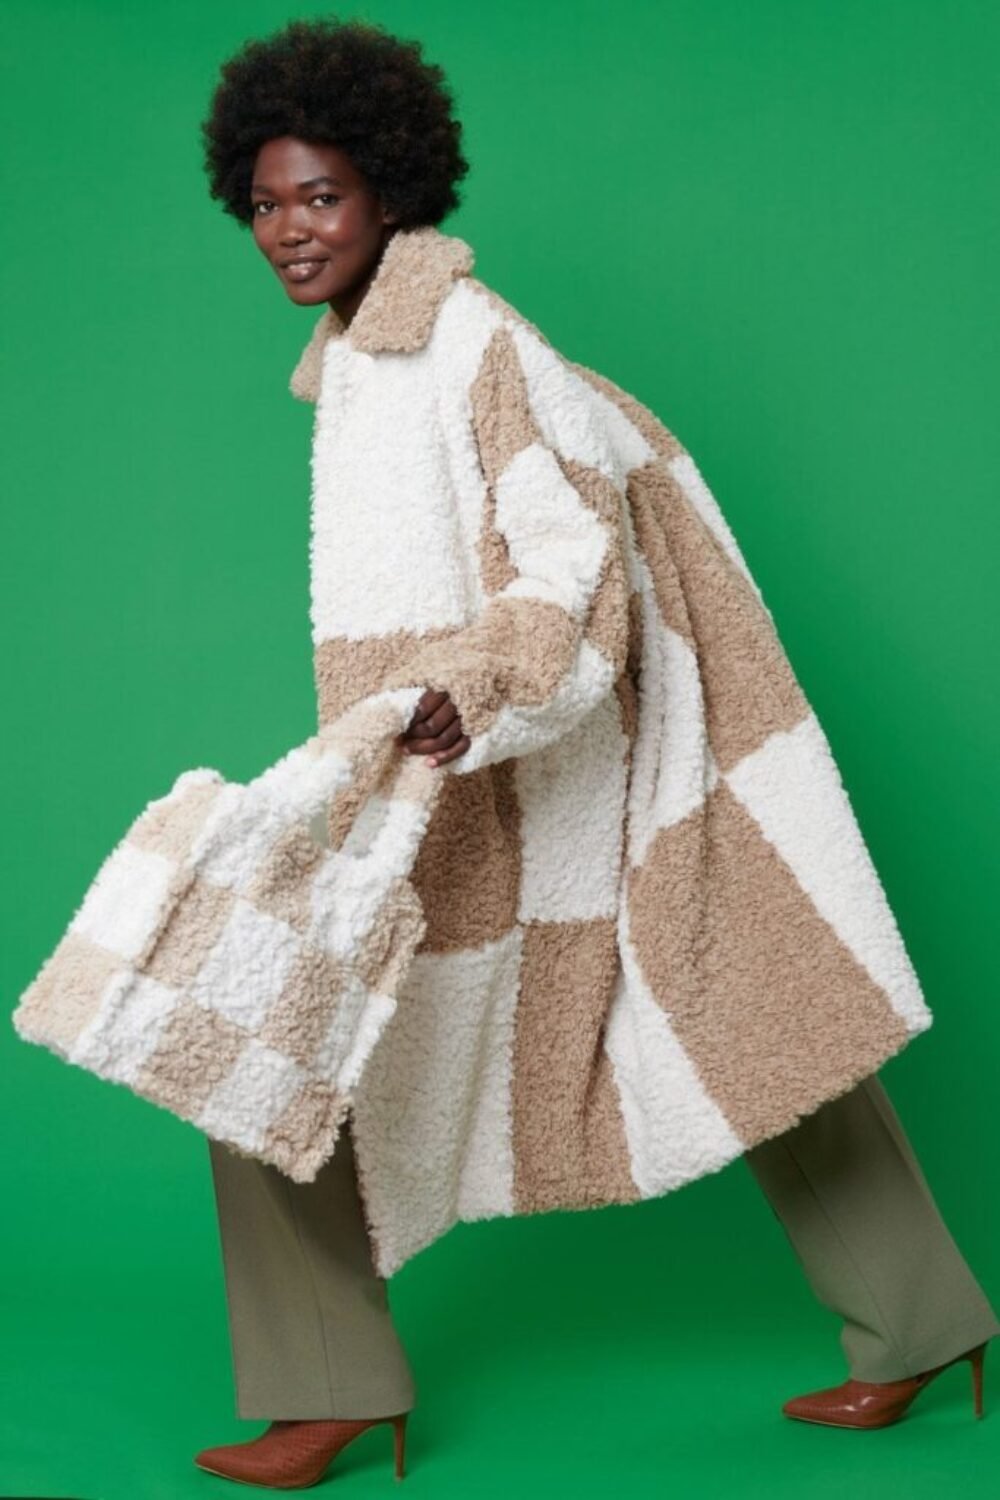 Shop Lux Checkered Mocha and White Faux Shearling Oversized Coat and women's luxury and designer clothes at www.lux-apparel.co.uk